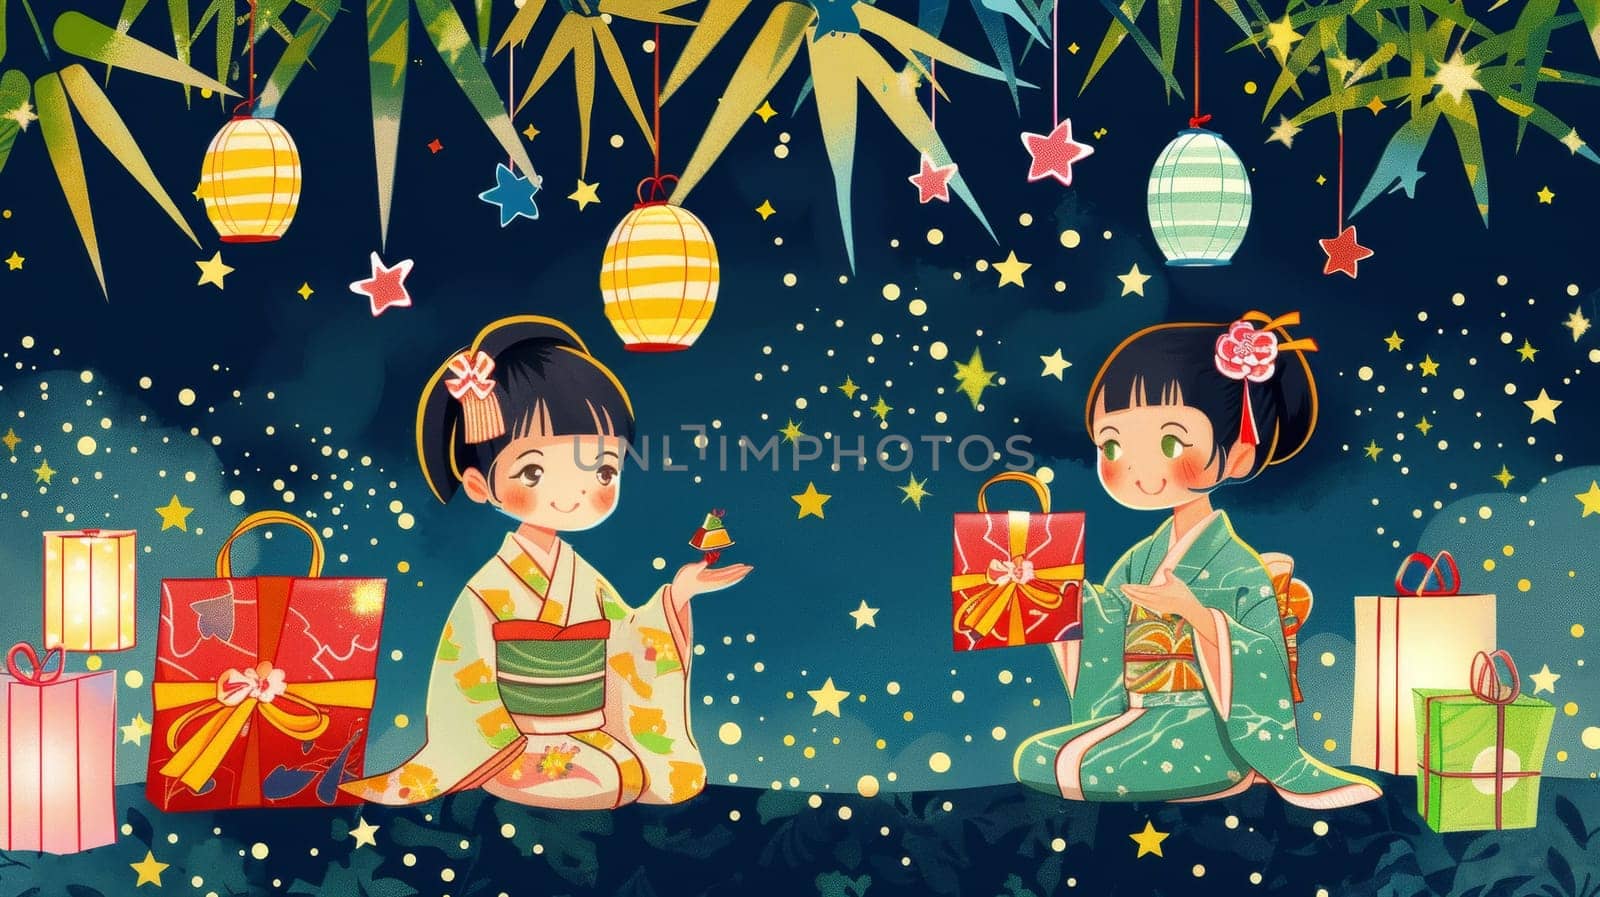 Illustration of two children in kimonos, smiling joyfully with gifts, under a starry sky adorned with Tanabata decorations. by sfinks